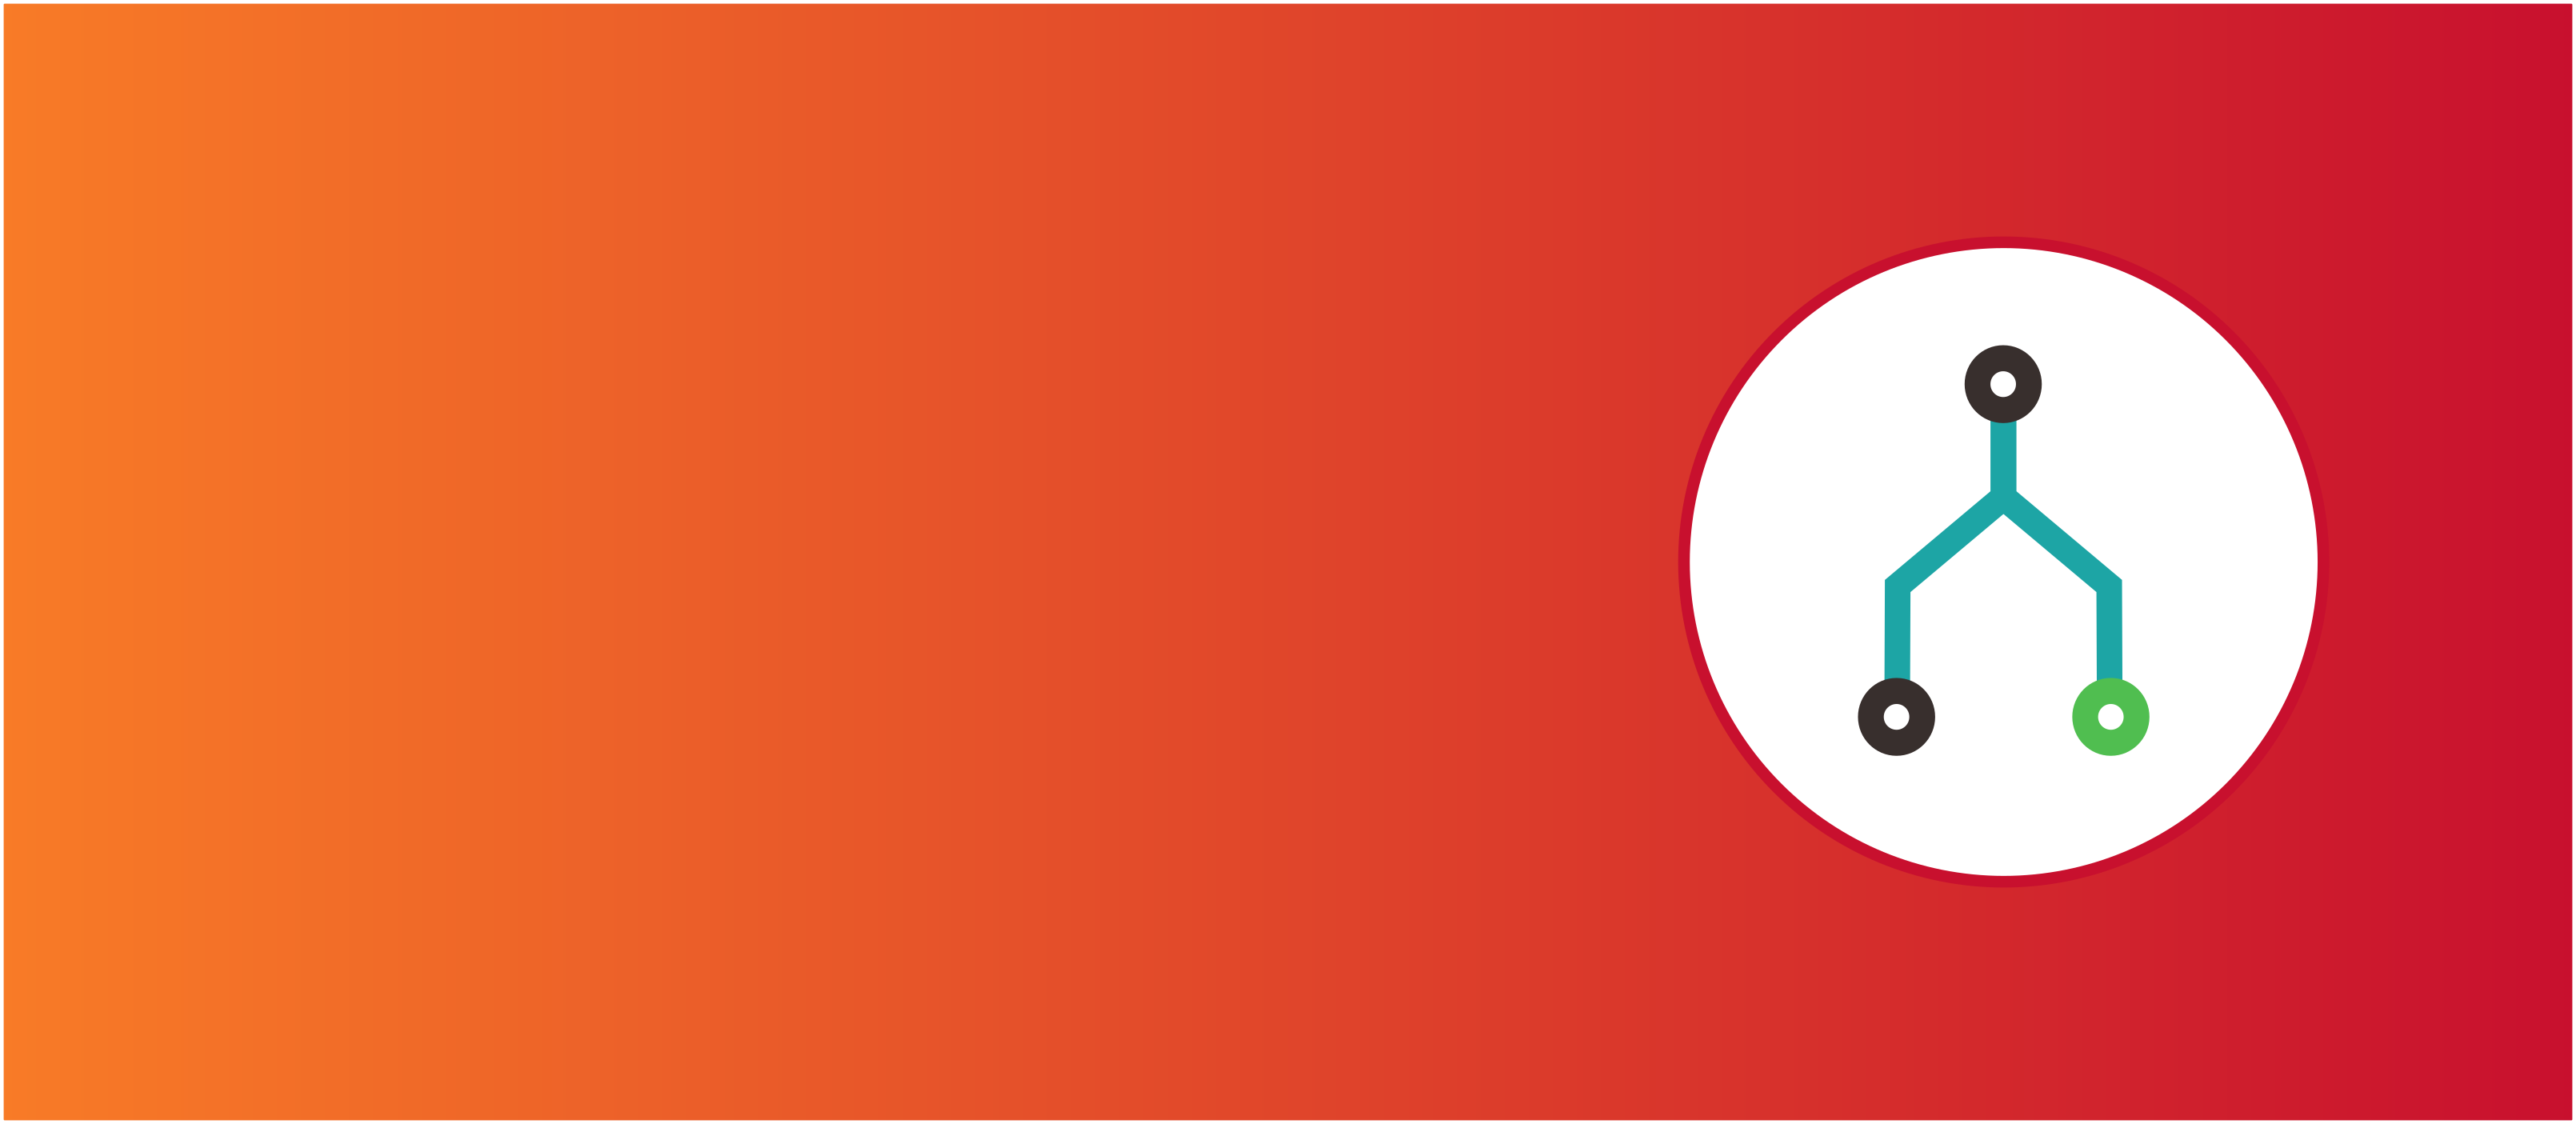 Logo of a logic tree on a background of orange-to-red gradient